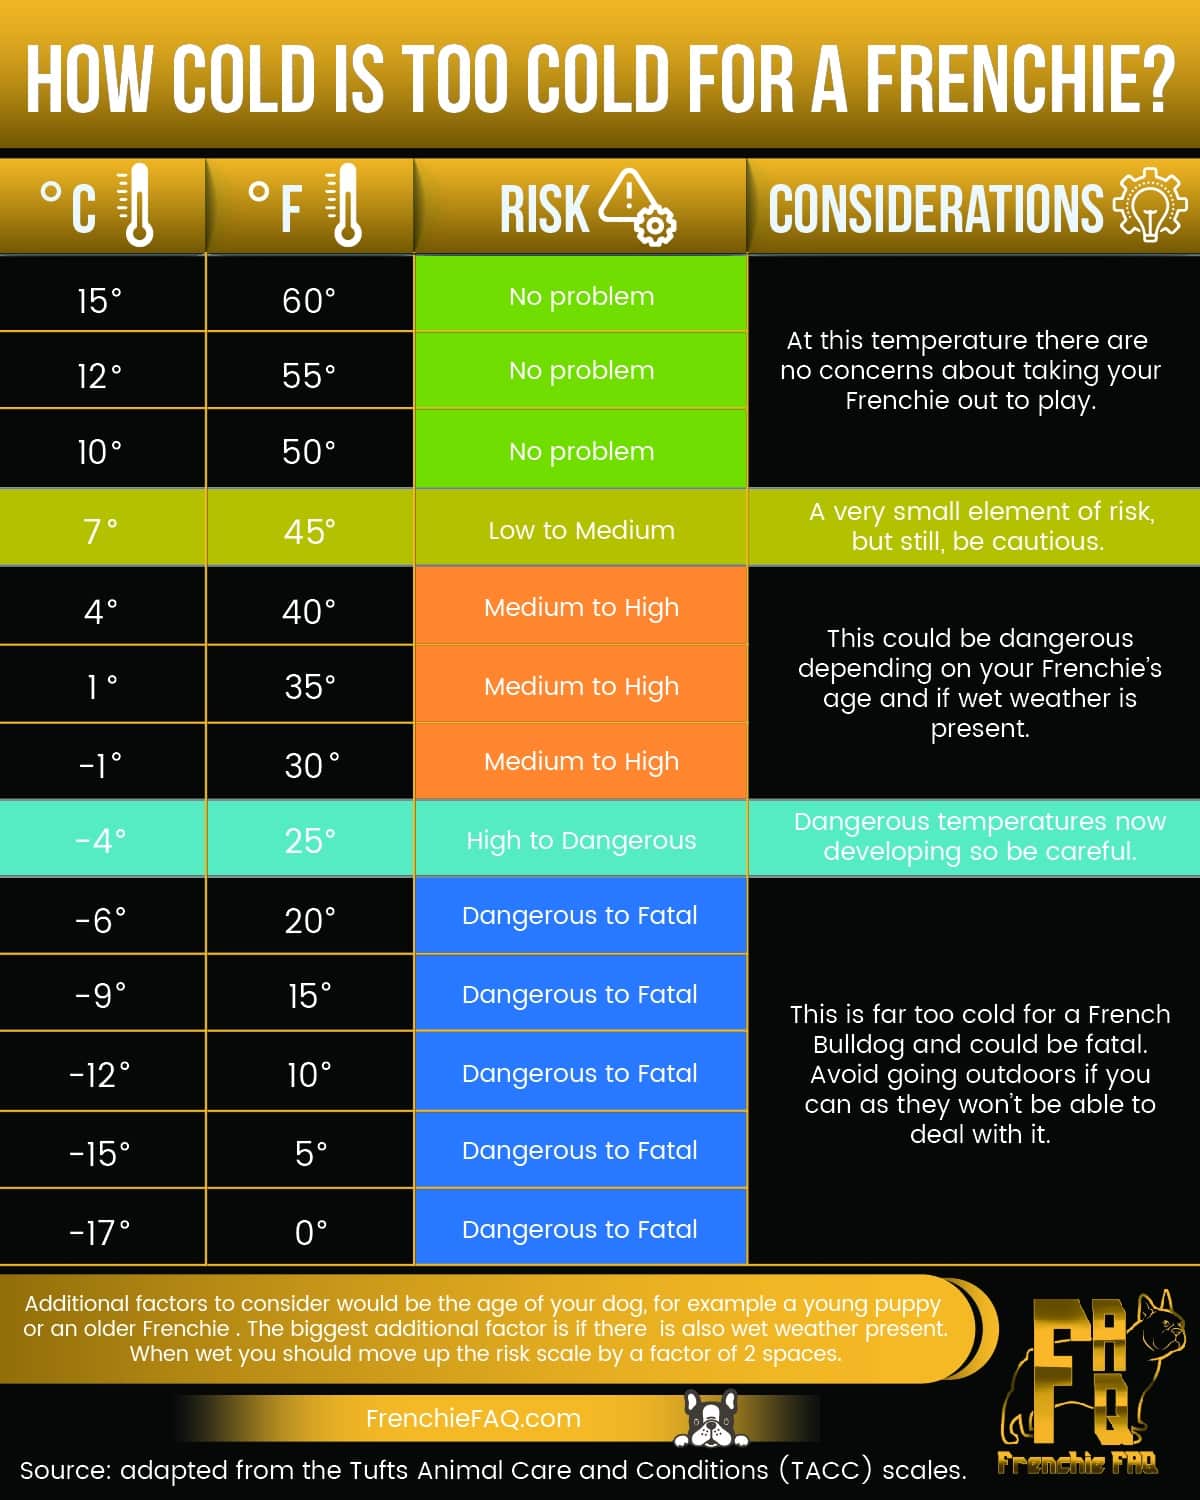 French Bulldog cold temperature guide using the tufts animal care conditions scale (TACC)